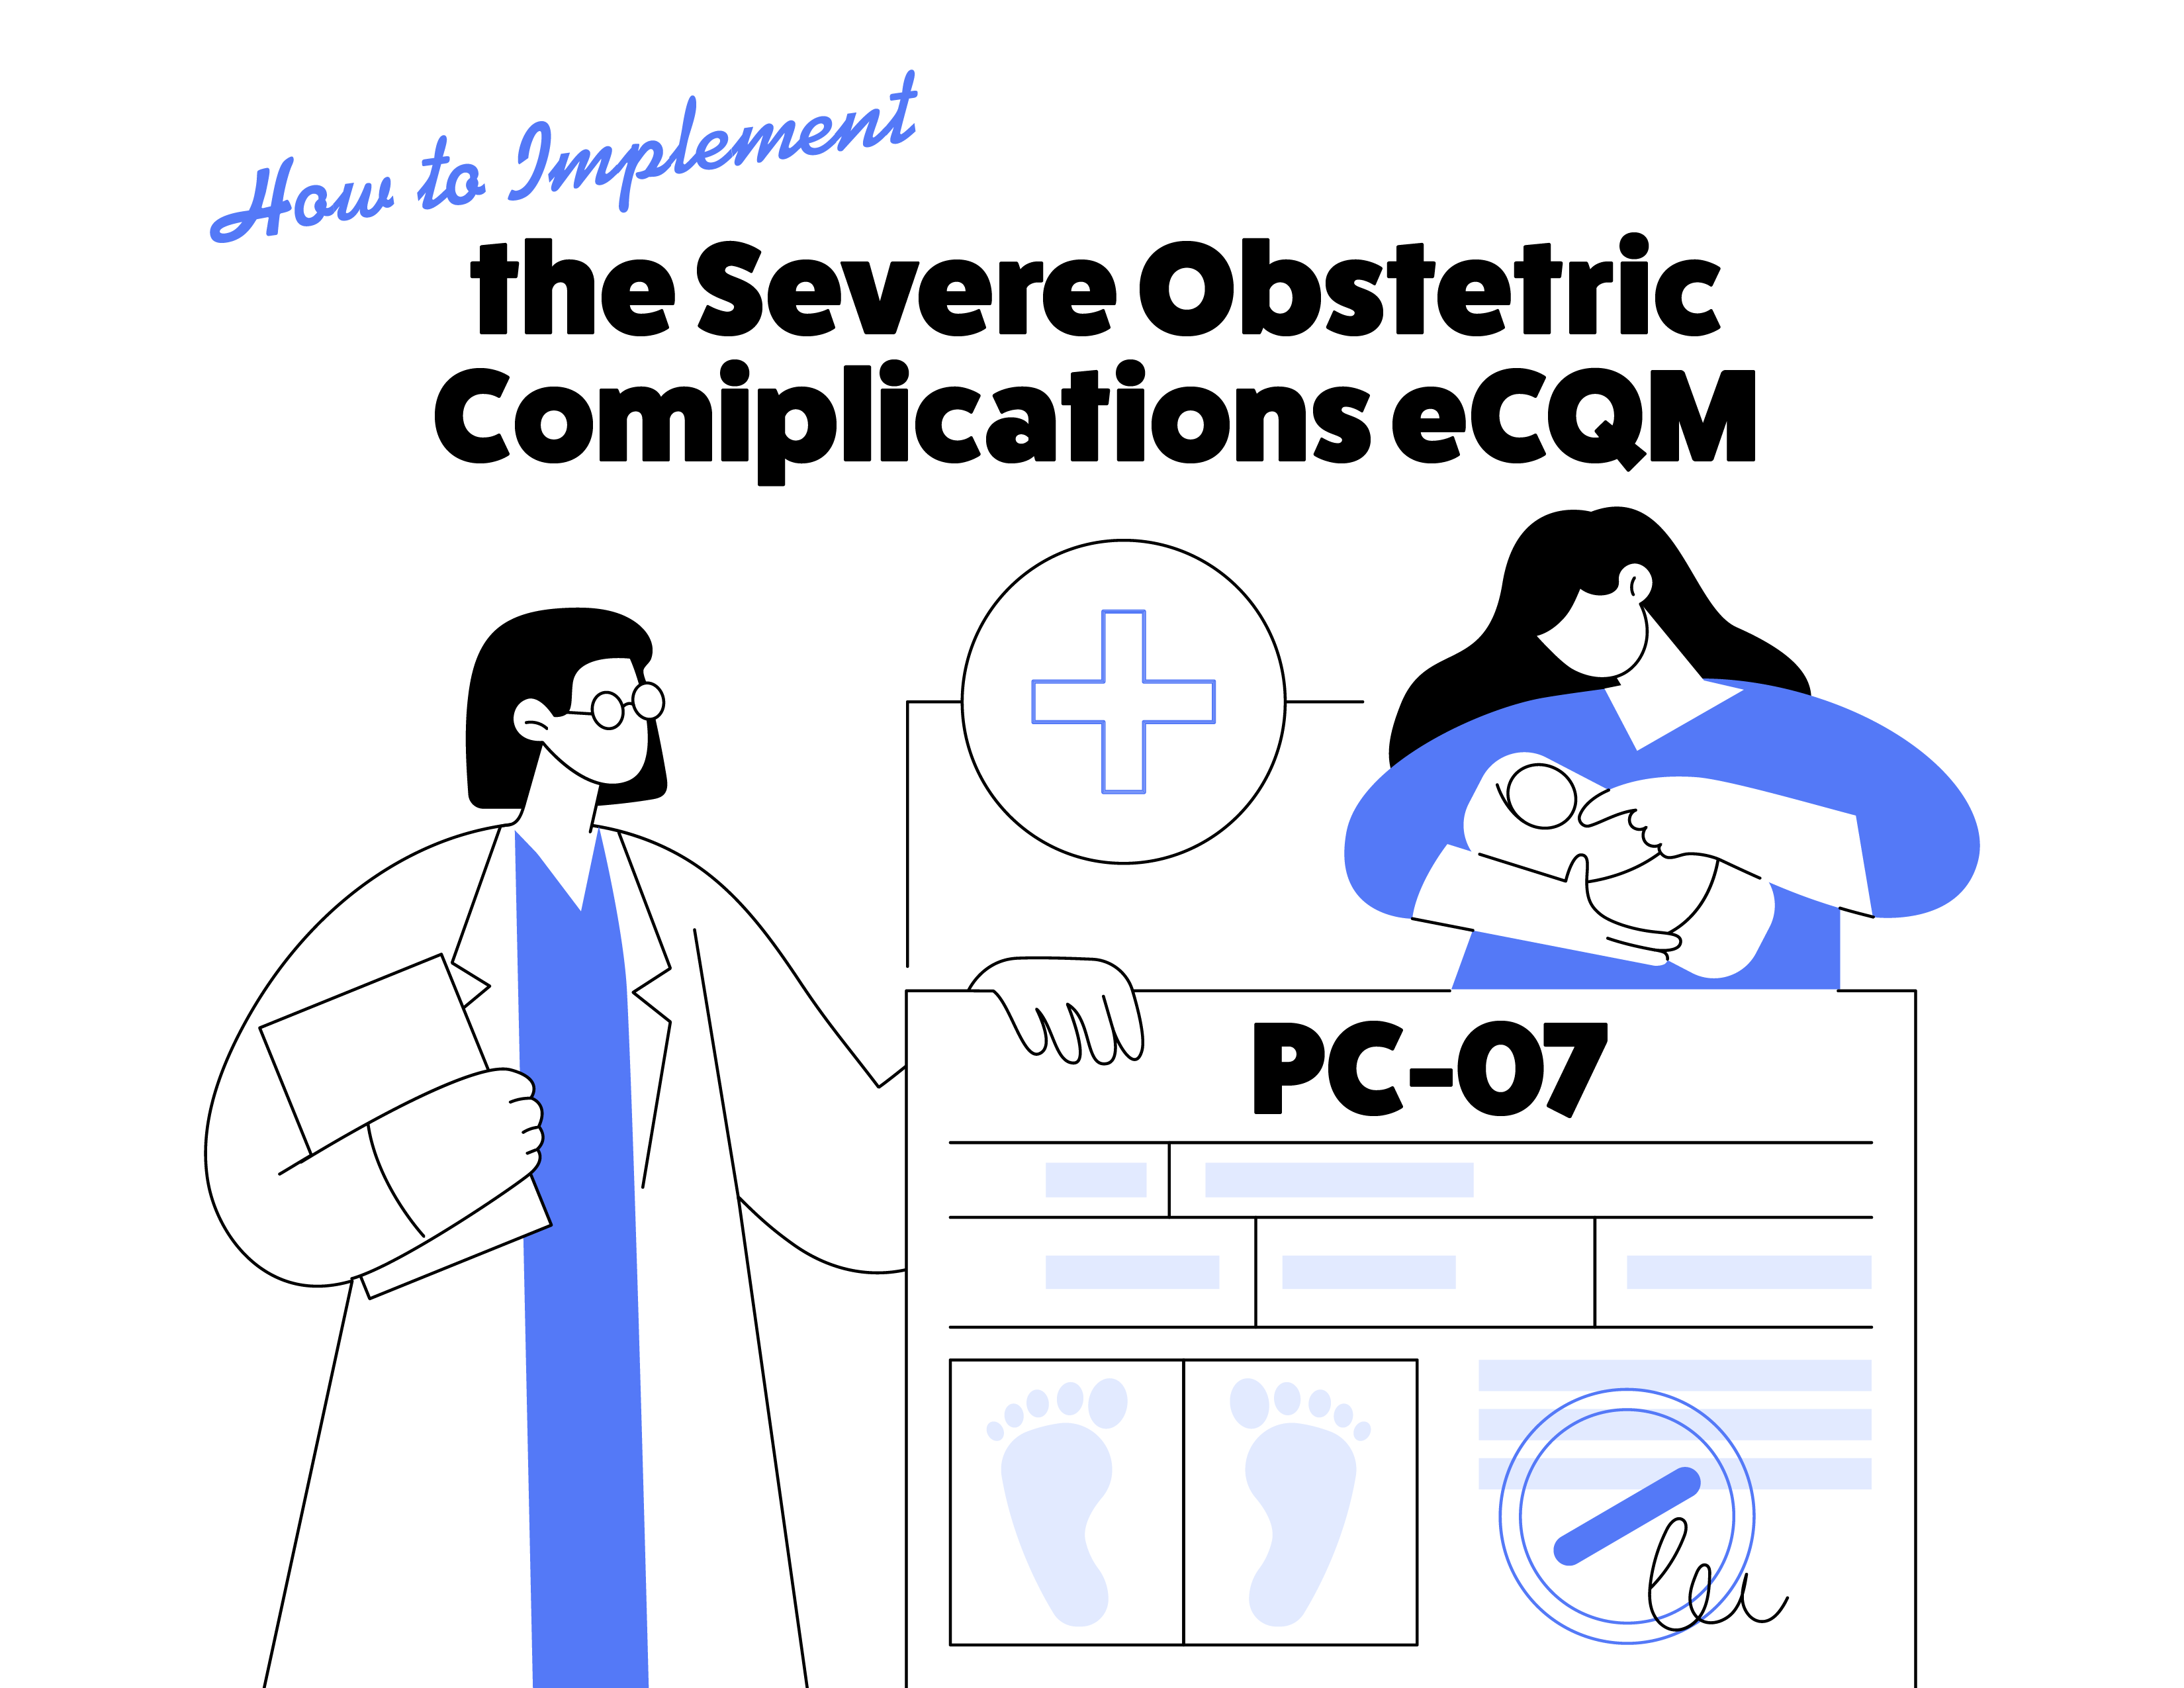 How to Implement the Severe Obstetric Complications eCQM